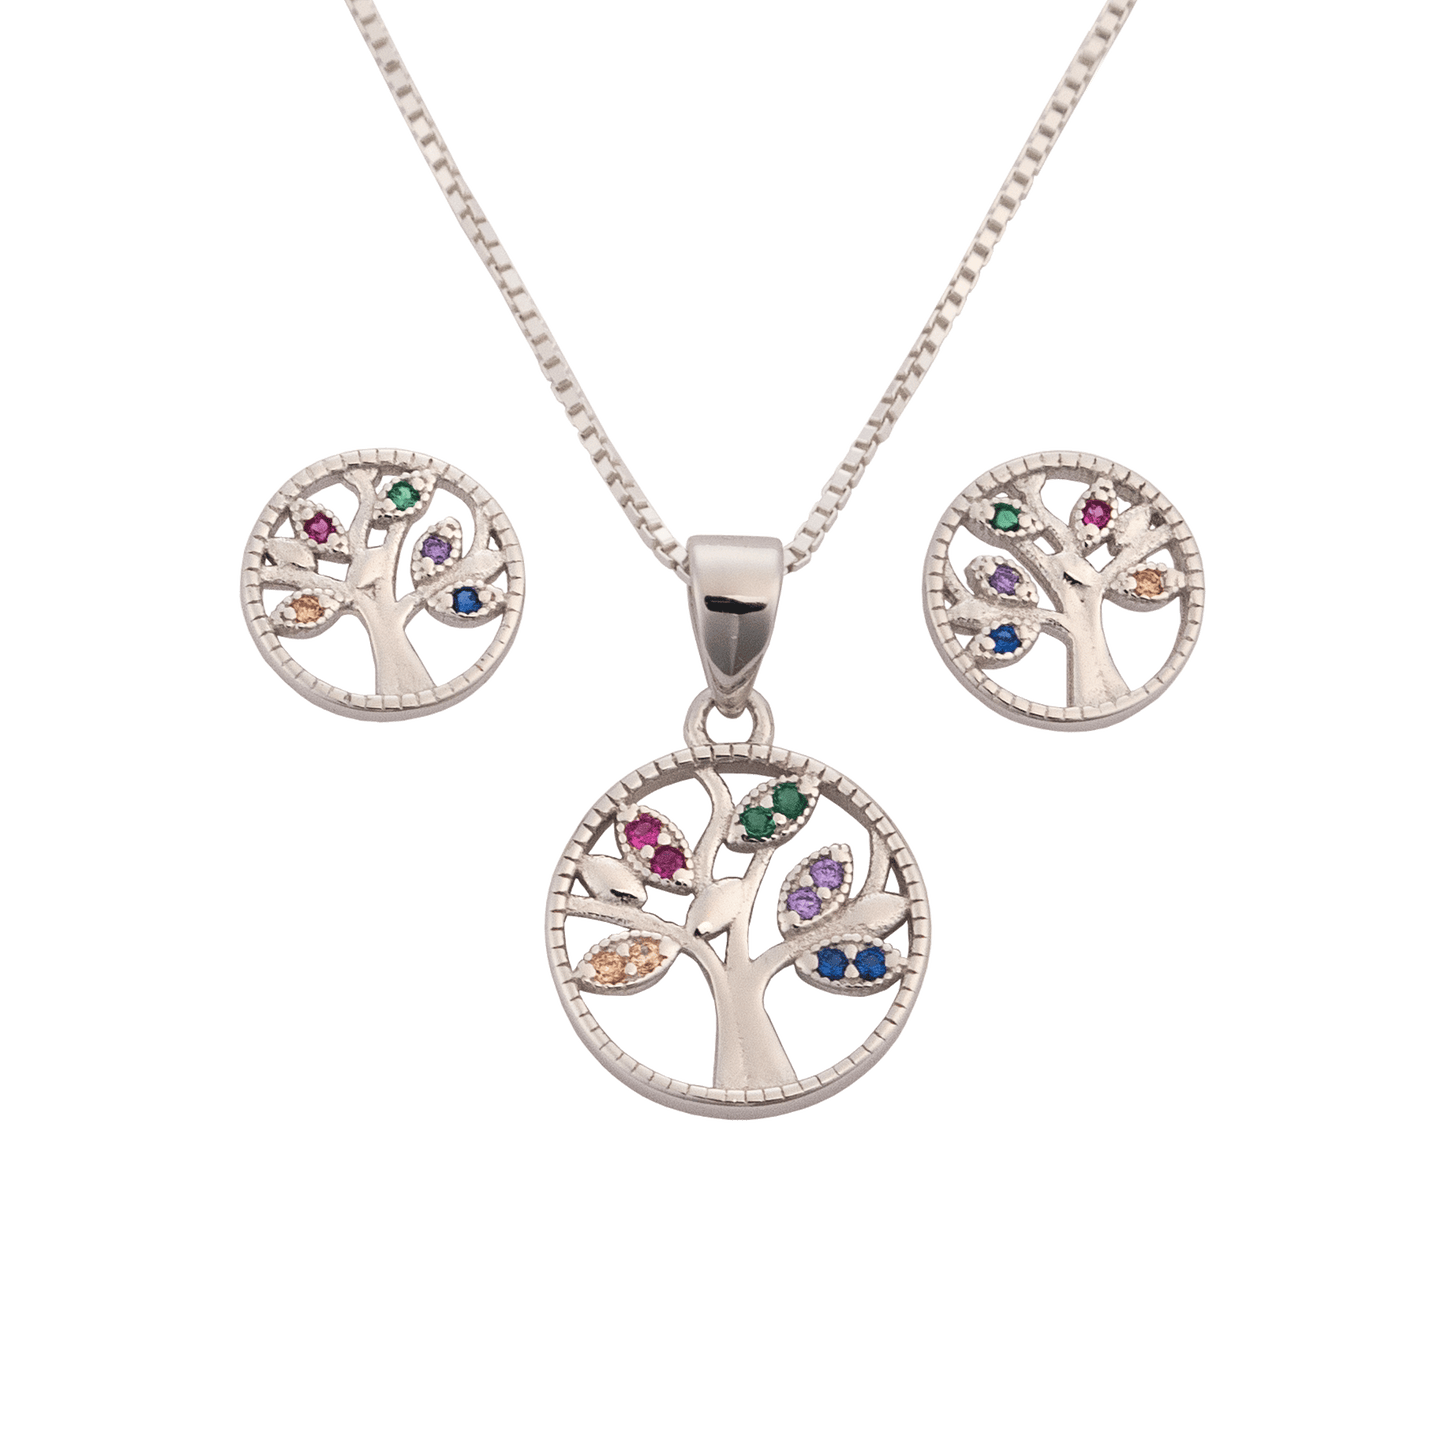 Tree of life silver necklace and earring set with colorful jewels